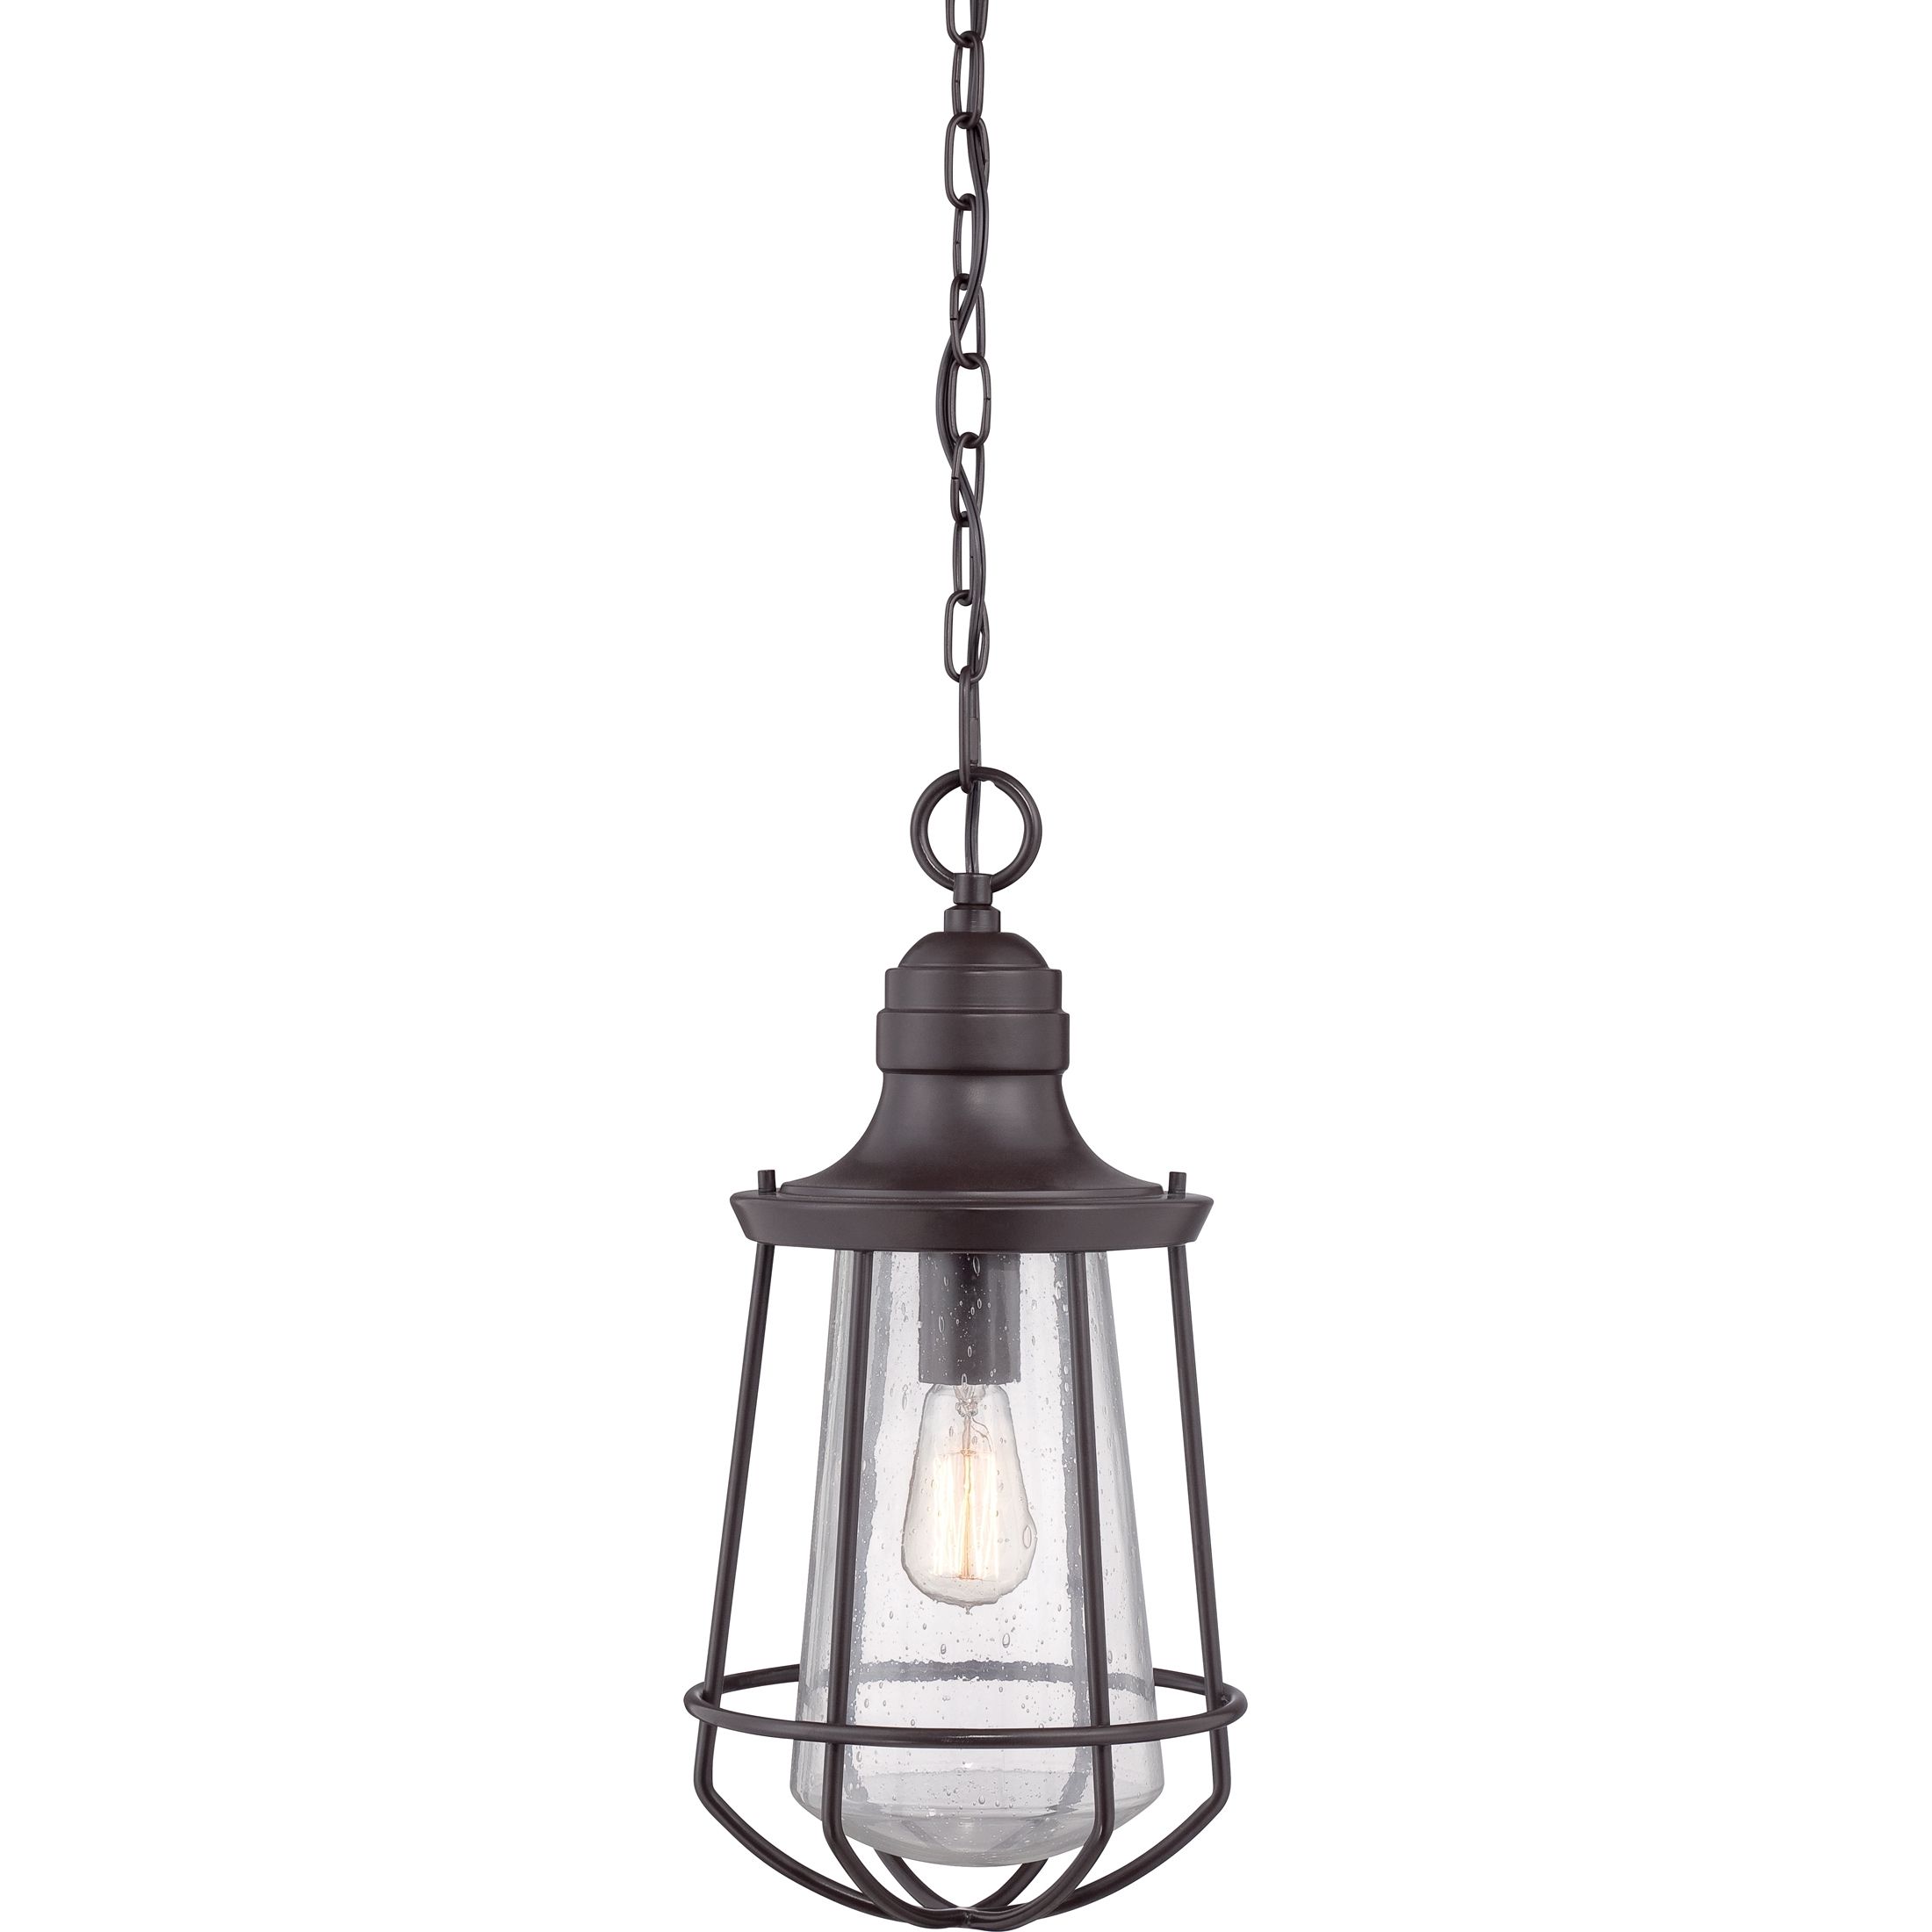 Quoizel|mre1909wt|outdoor Hanging Wstrn Brnz | 9. Zone I | Pinterest For Nautical Outdoor Hanging Lights (Photo 5 of 15)